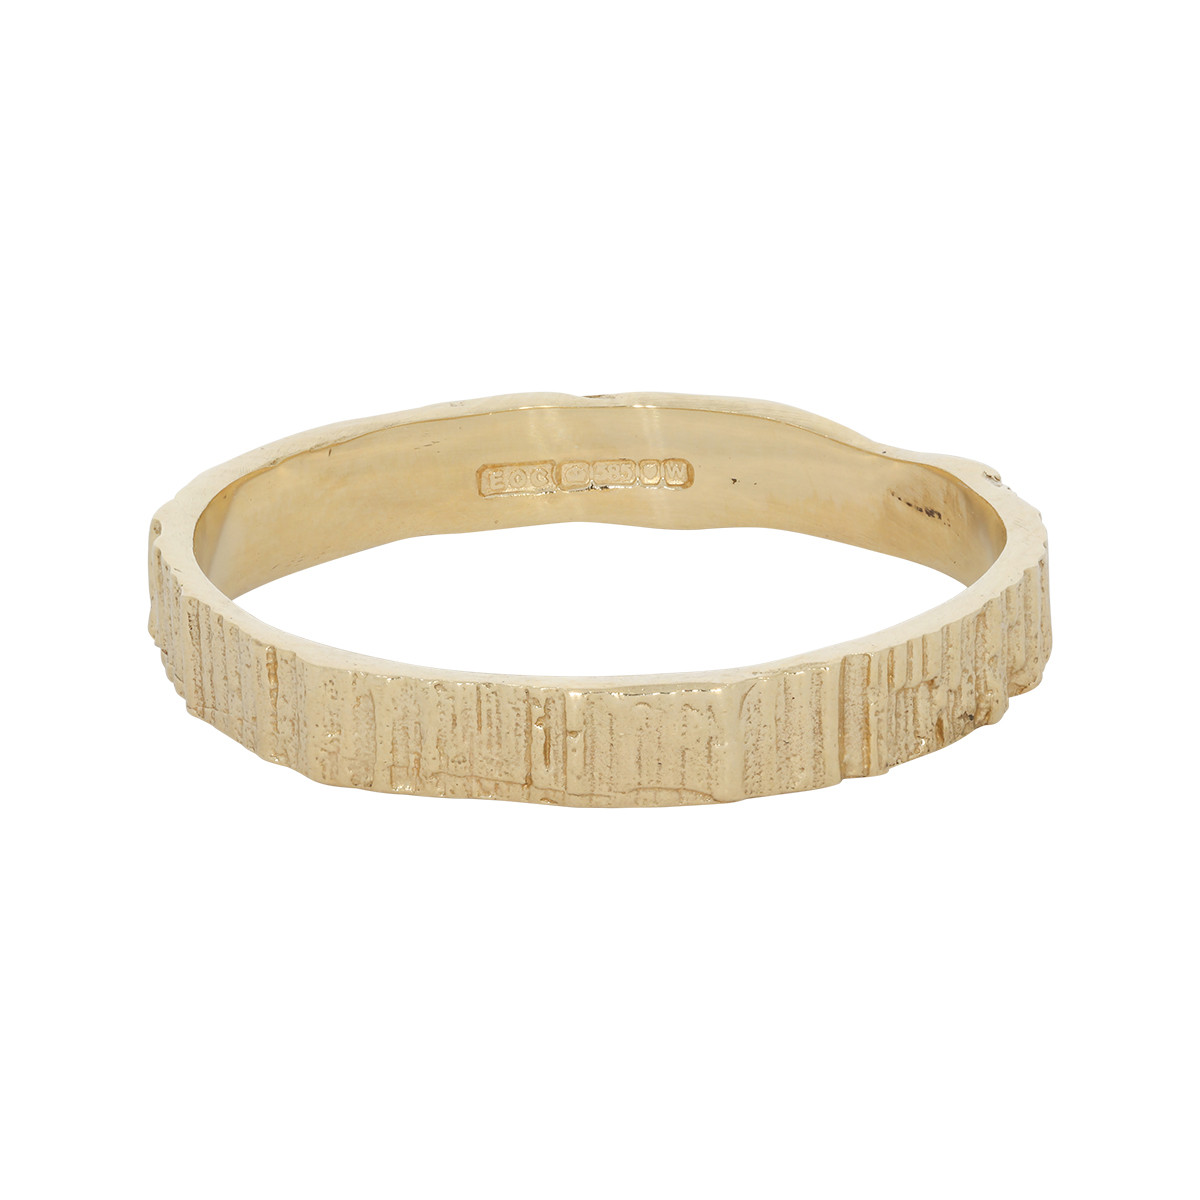 Eily O'Connell: 3mm Bark Band 14ct Yellow Gold, tomfoolery